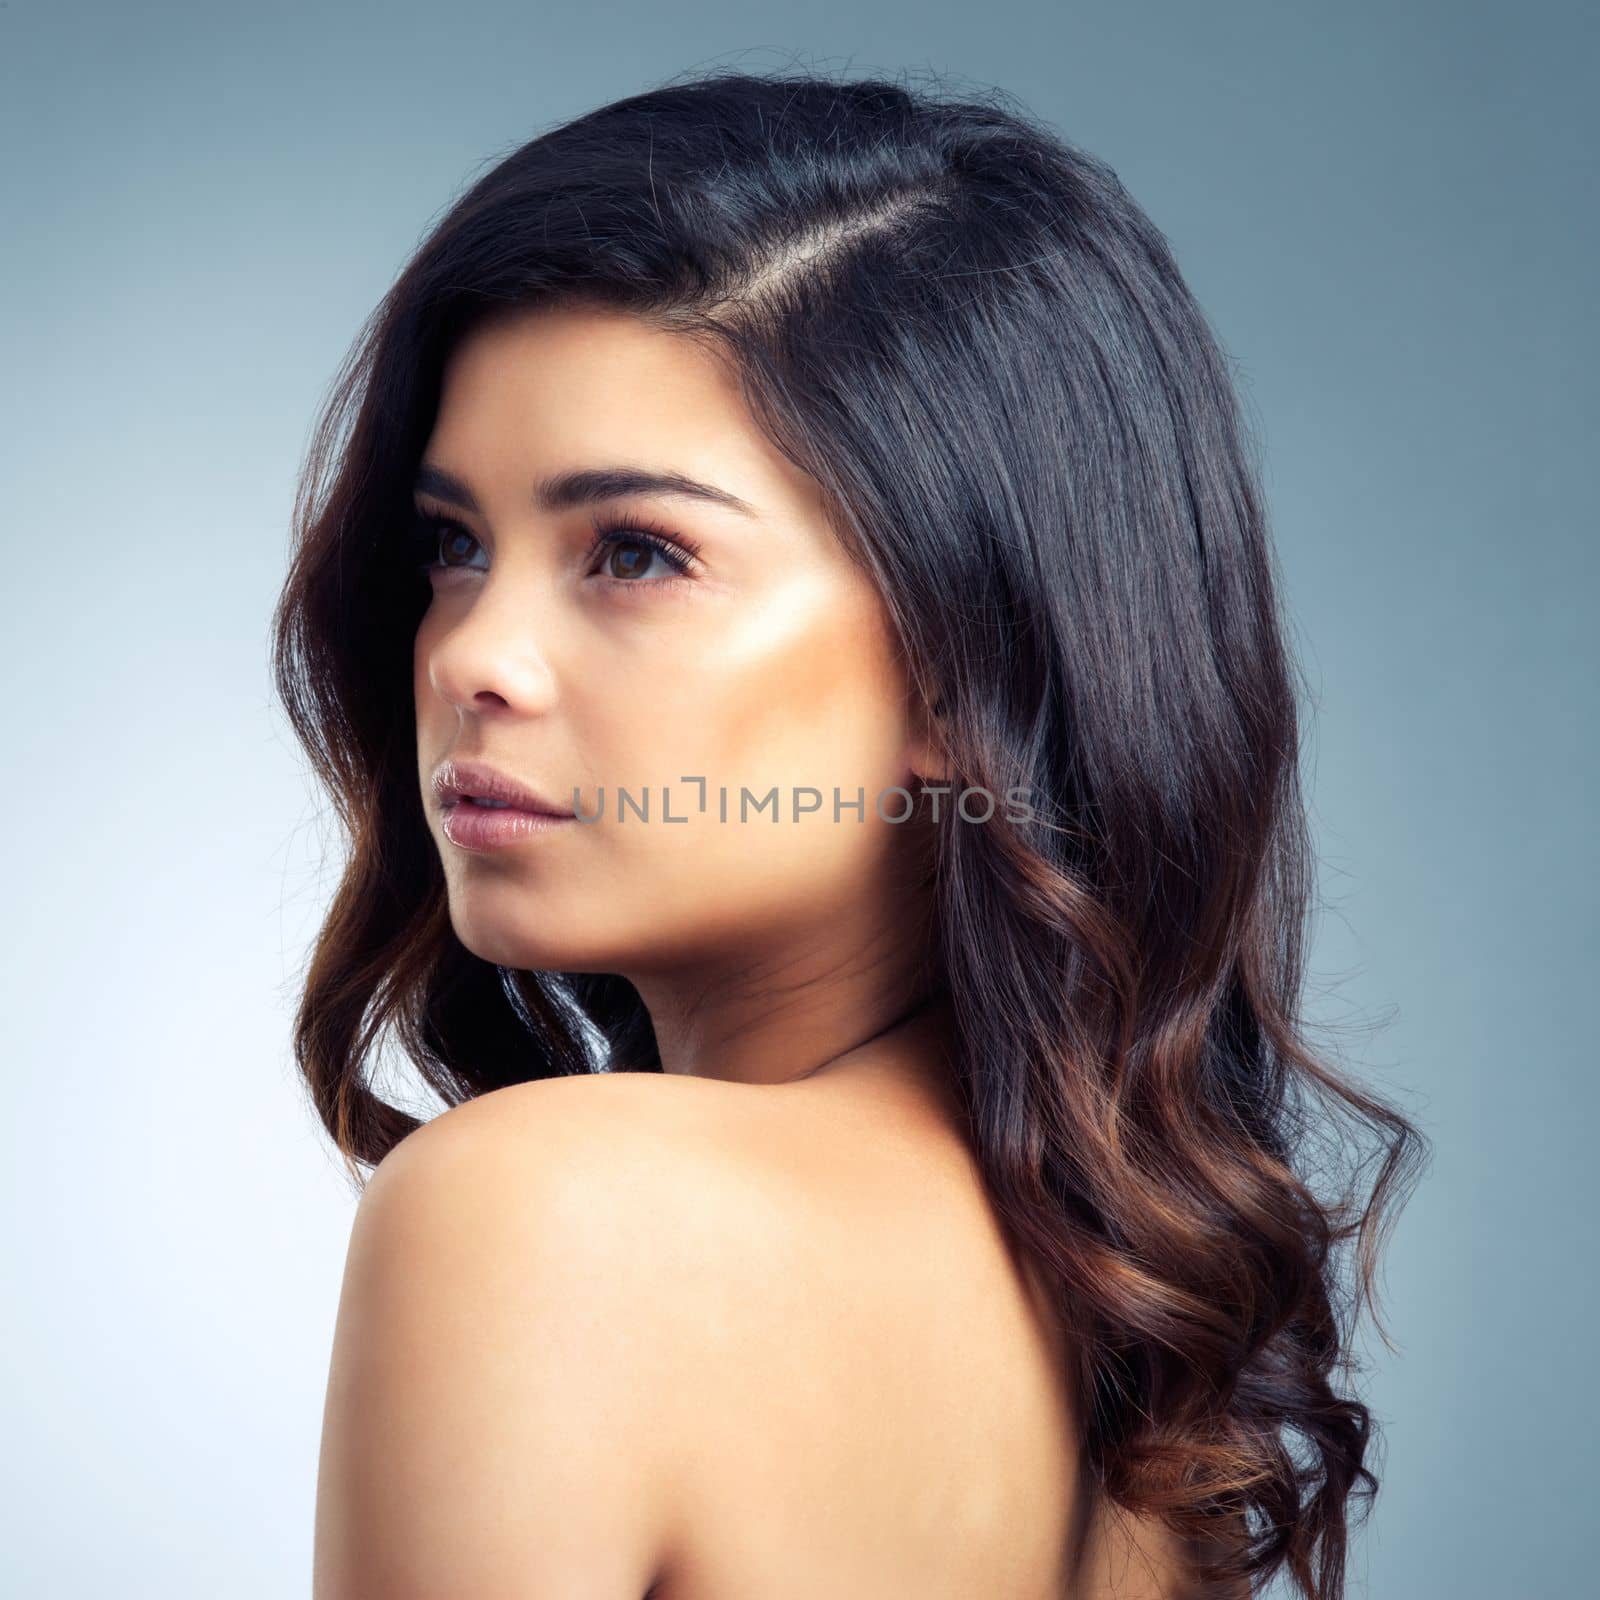 Her beauty is beyond compare. Studio shot of a beautiful young woman posing against a gray background